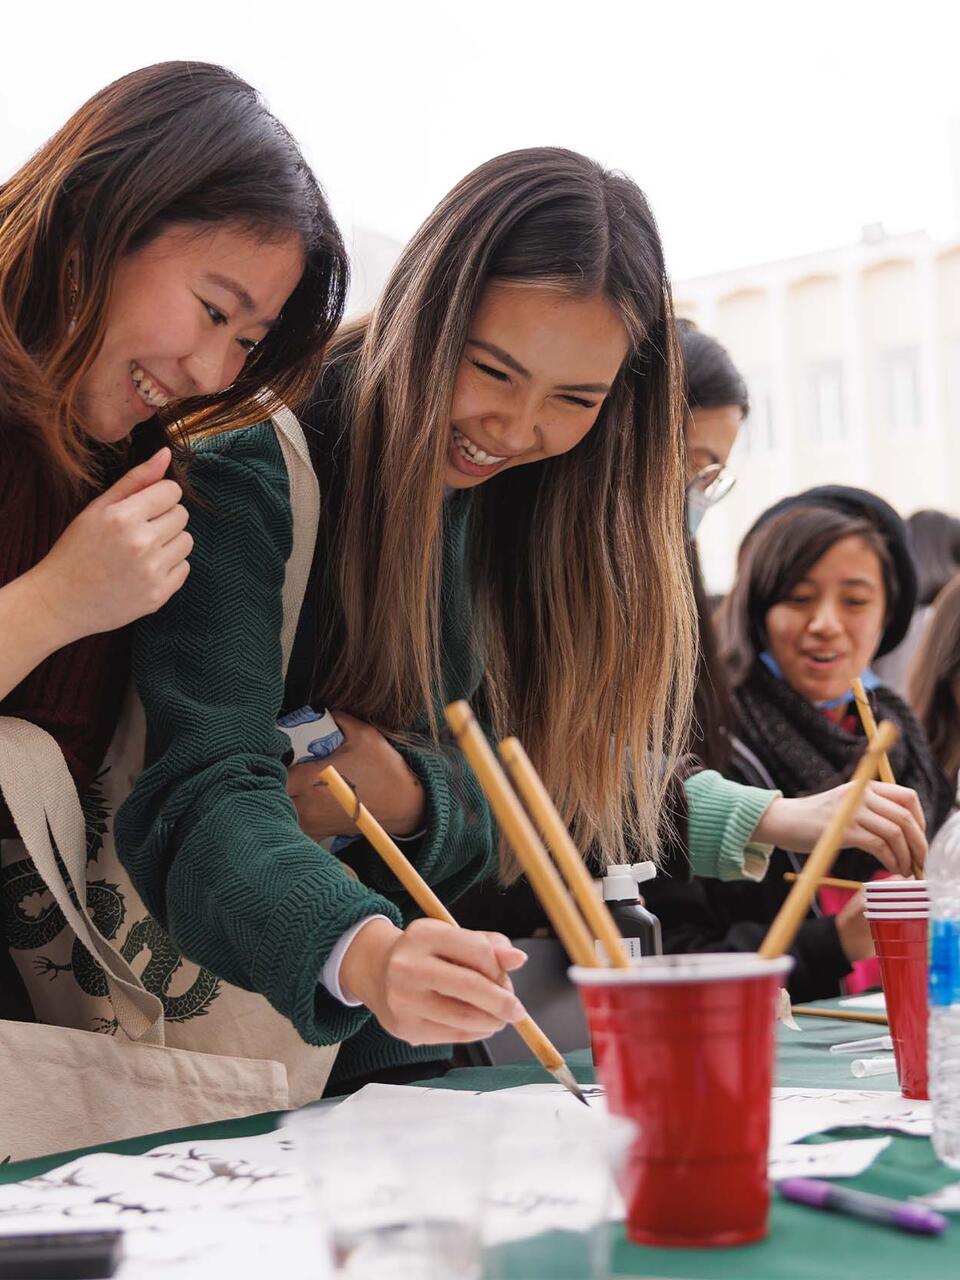 Students painting at a table